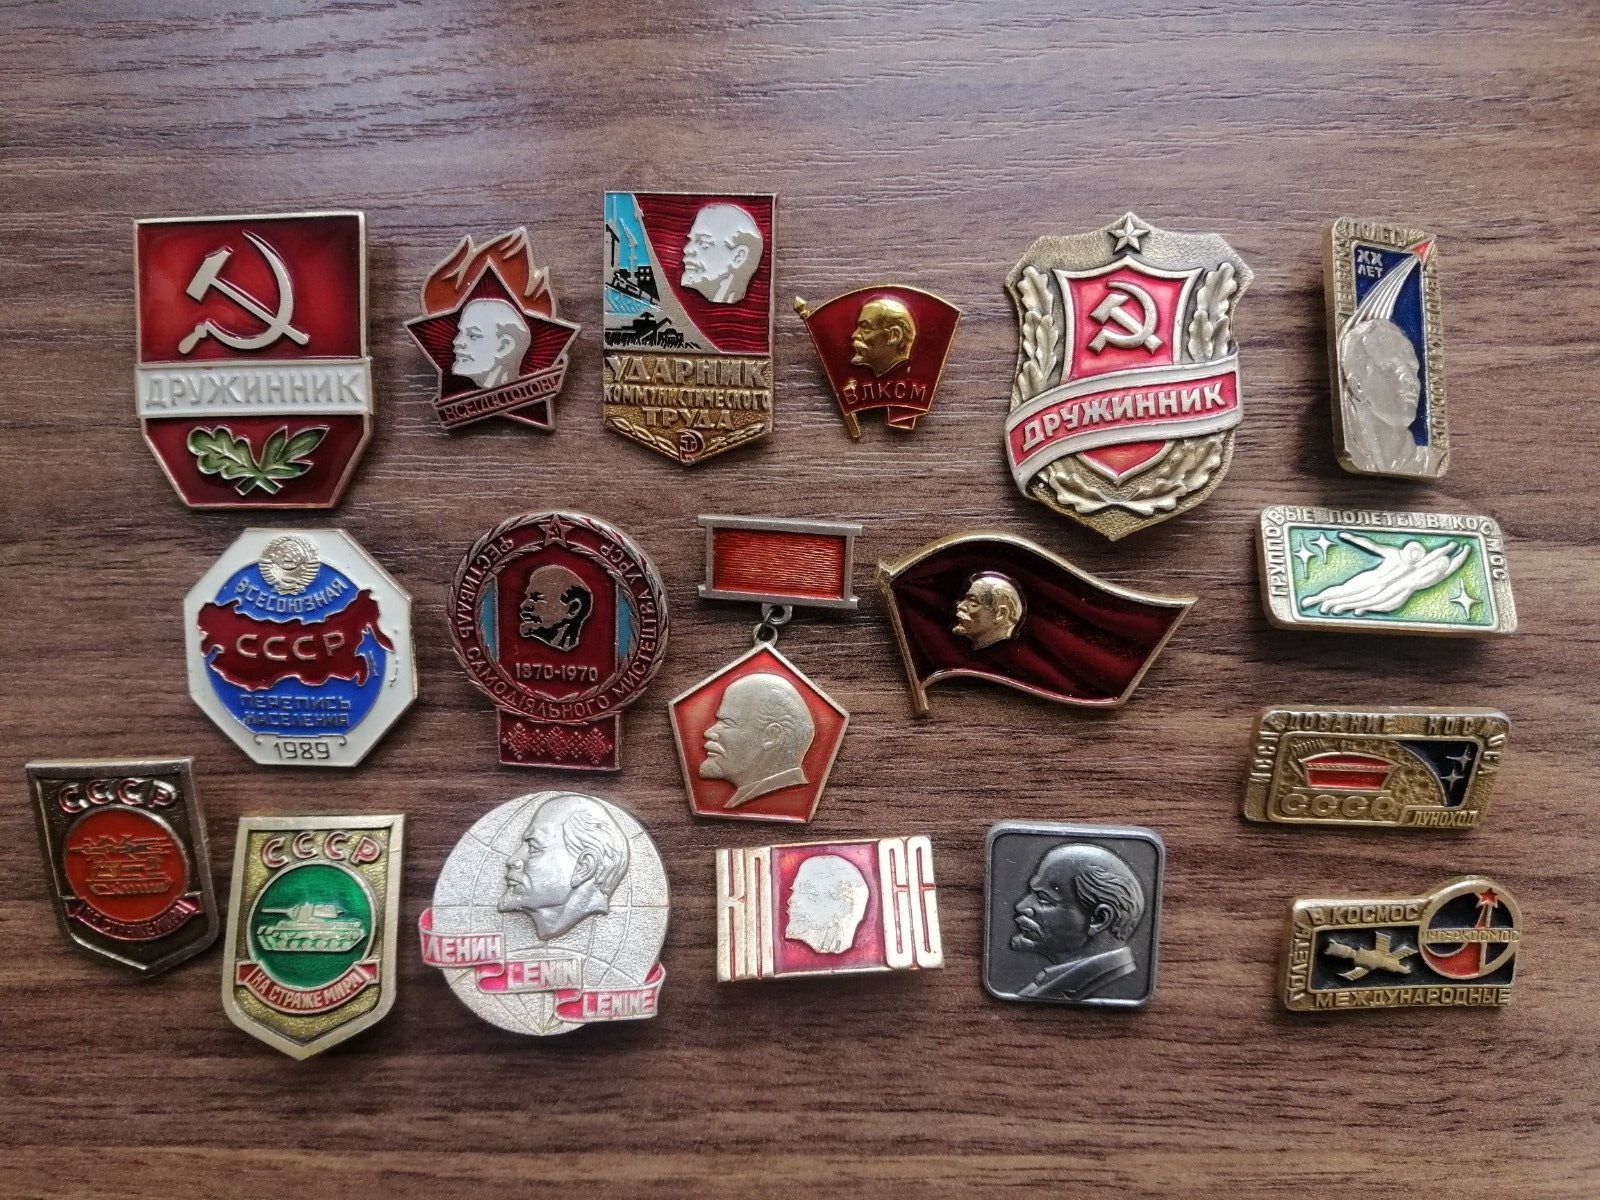 Vintage USSR badges on the themes:Space, Lenin, Communist propaganda and others.